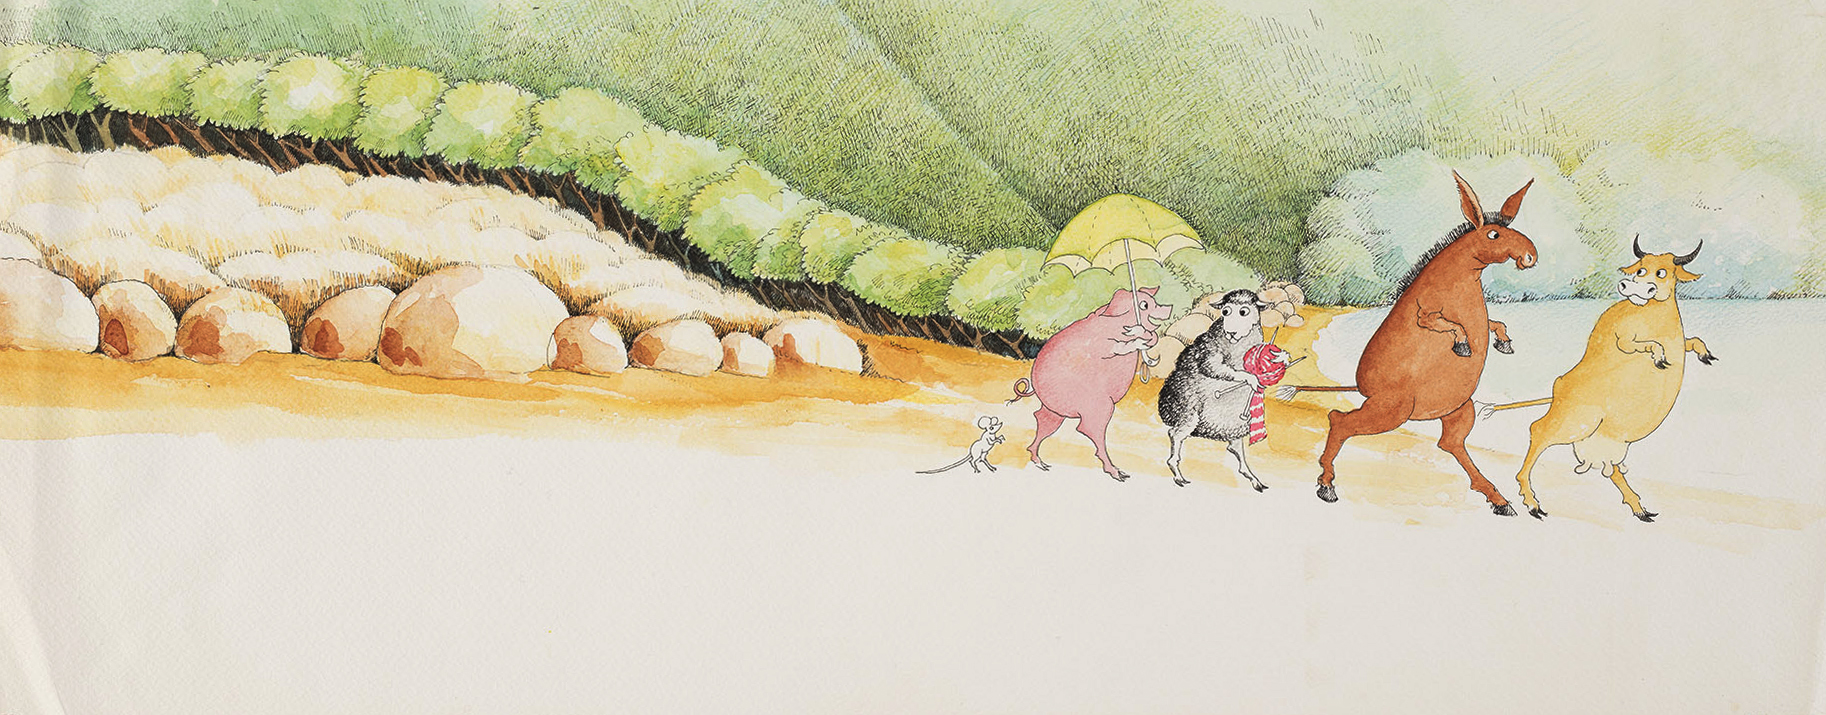 A cow, a donkey, a sheep, a pig, and a tiny mouse are walking along the seaside.